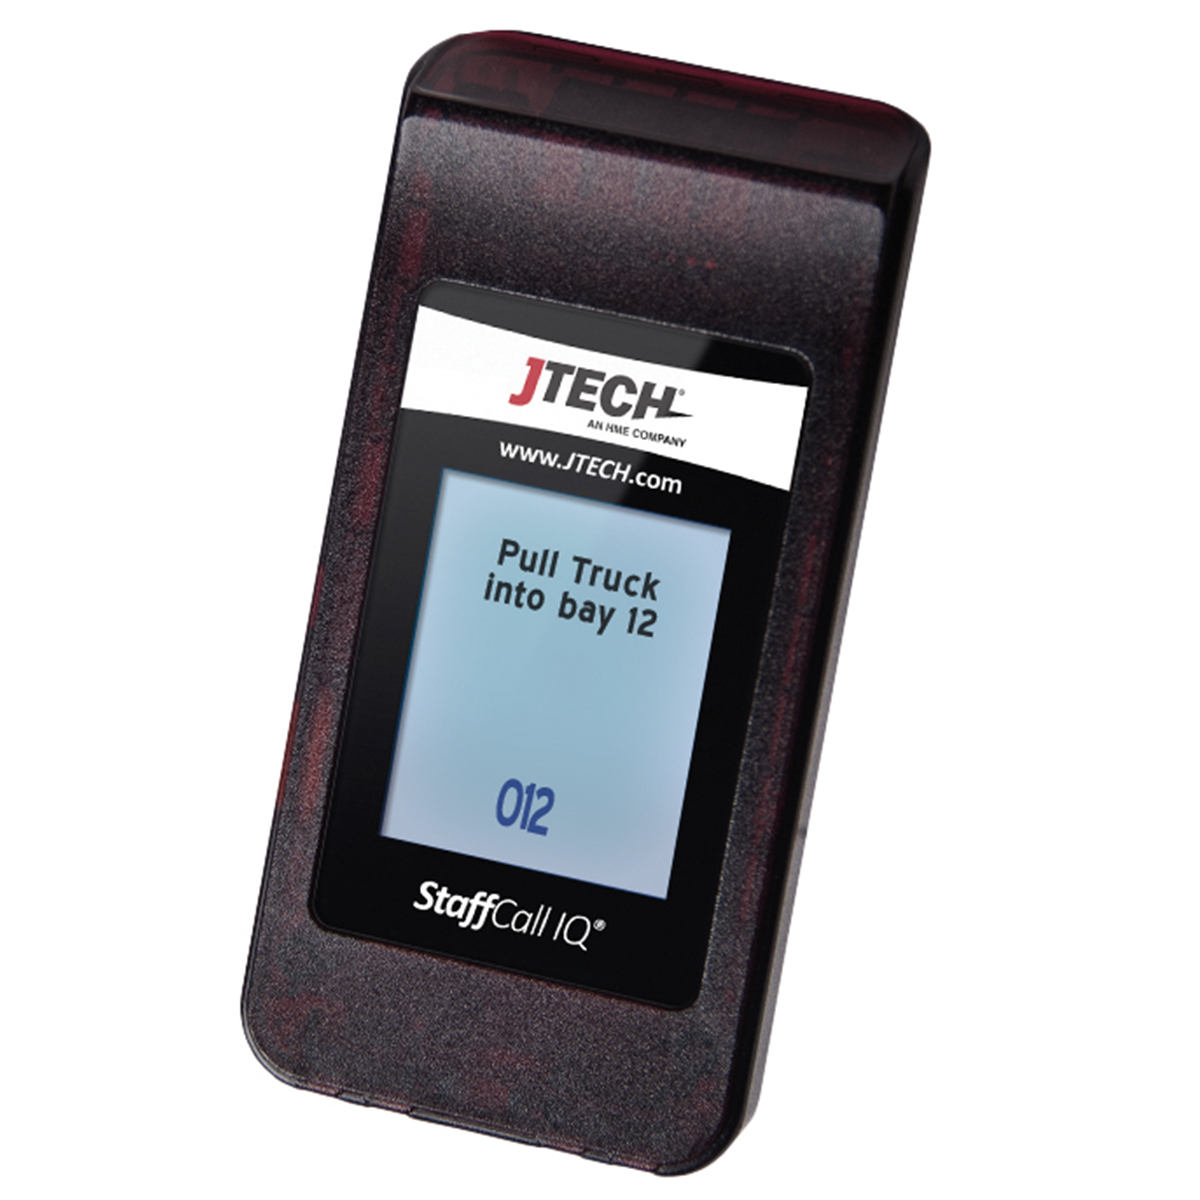 StaffCall IQ Pager Warehouse_Hires - Square